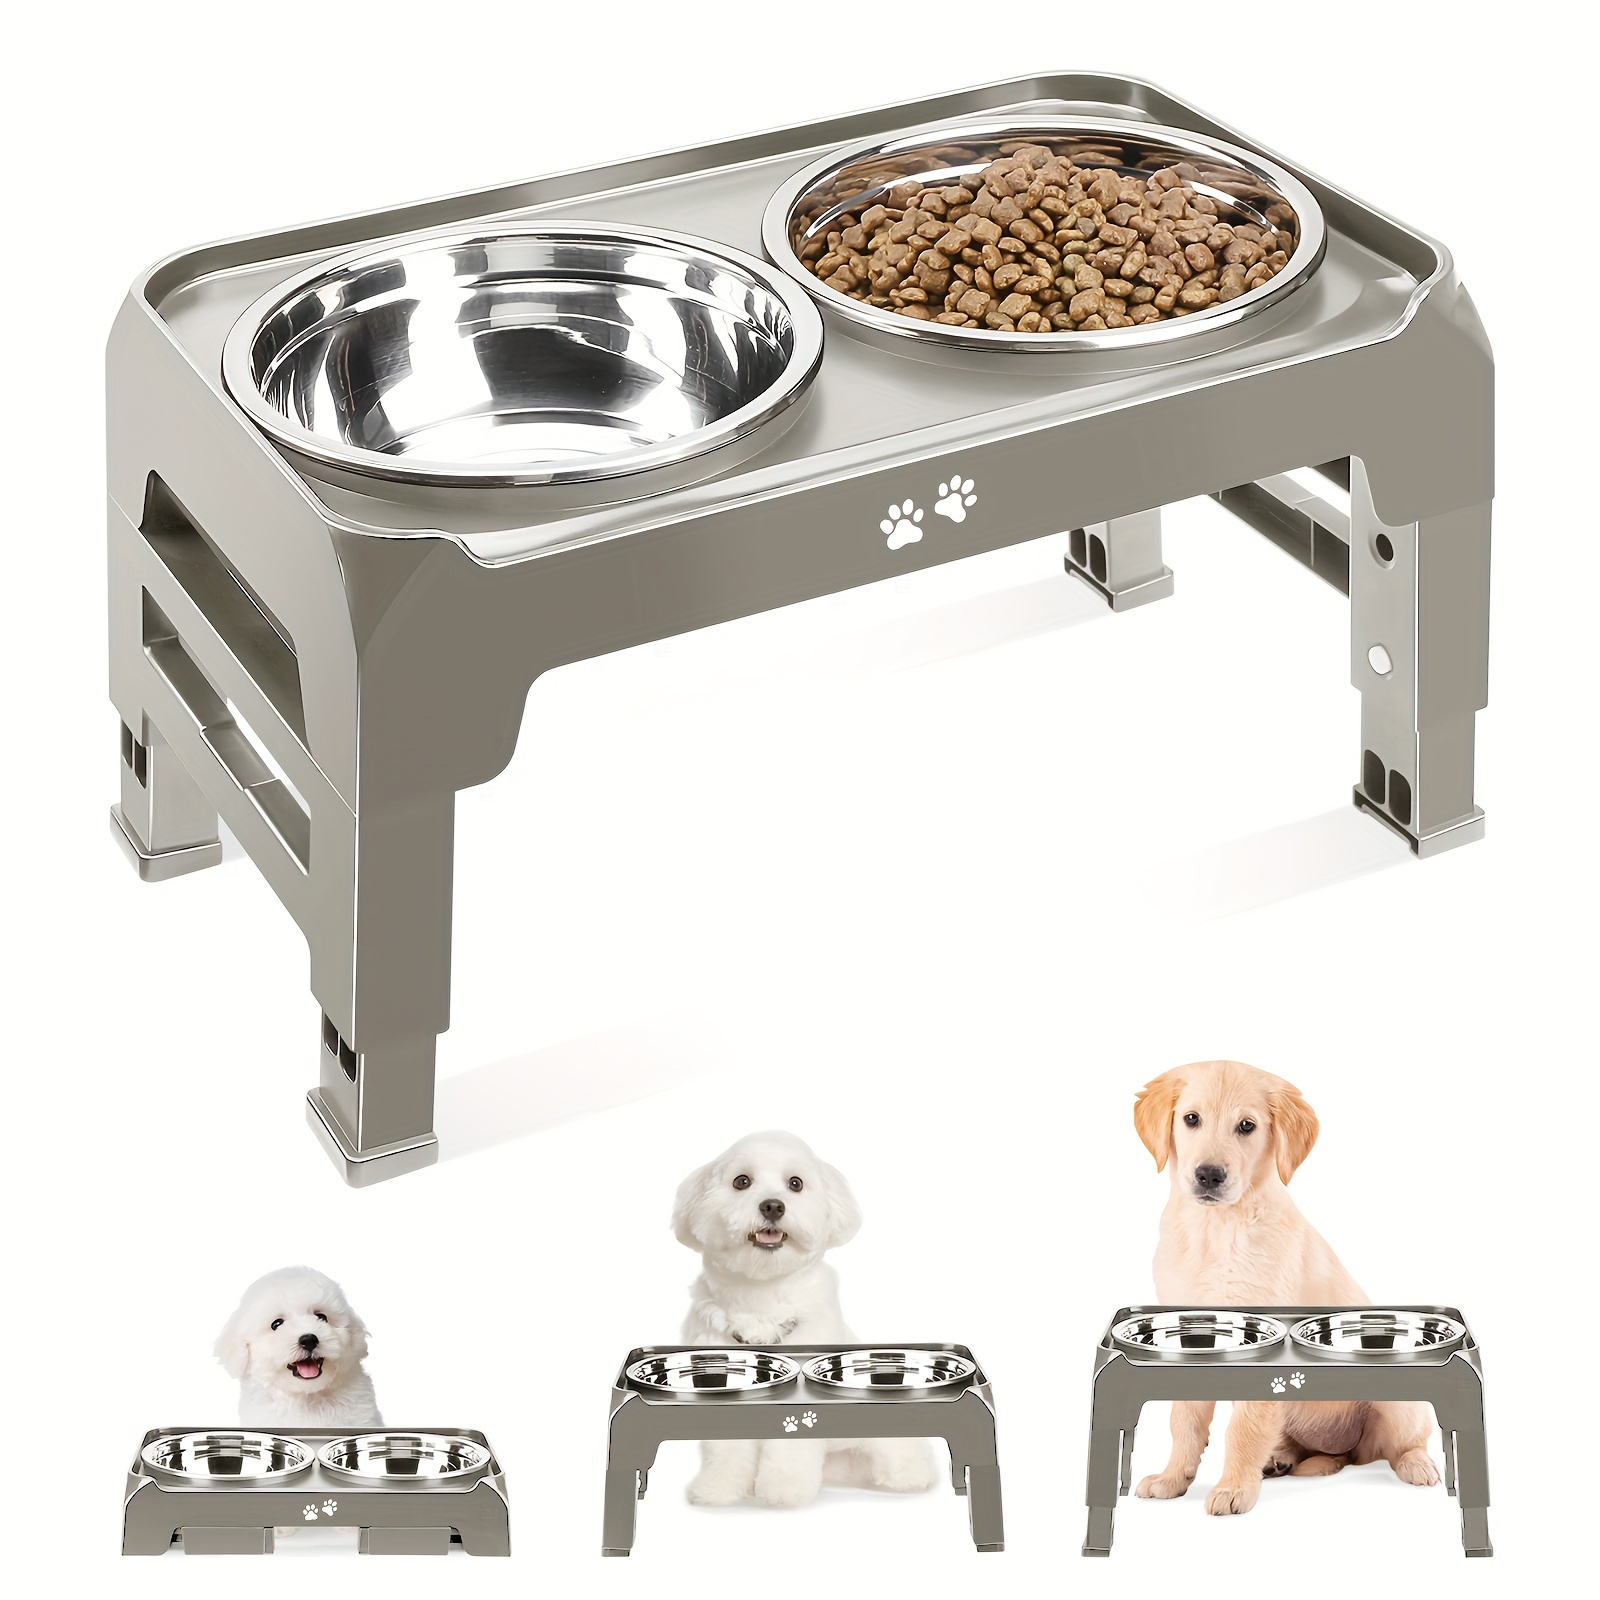 

Adjustable Elevated Dog Bowl Stand With 2 Stainless Steel Bowls - Non-slip, Foldable Feeder For Small To Medium Breeds - Neck & Joint Protection, Easy Clean